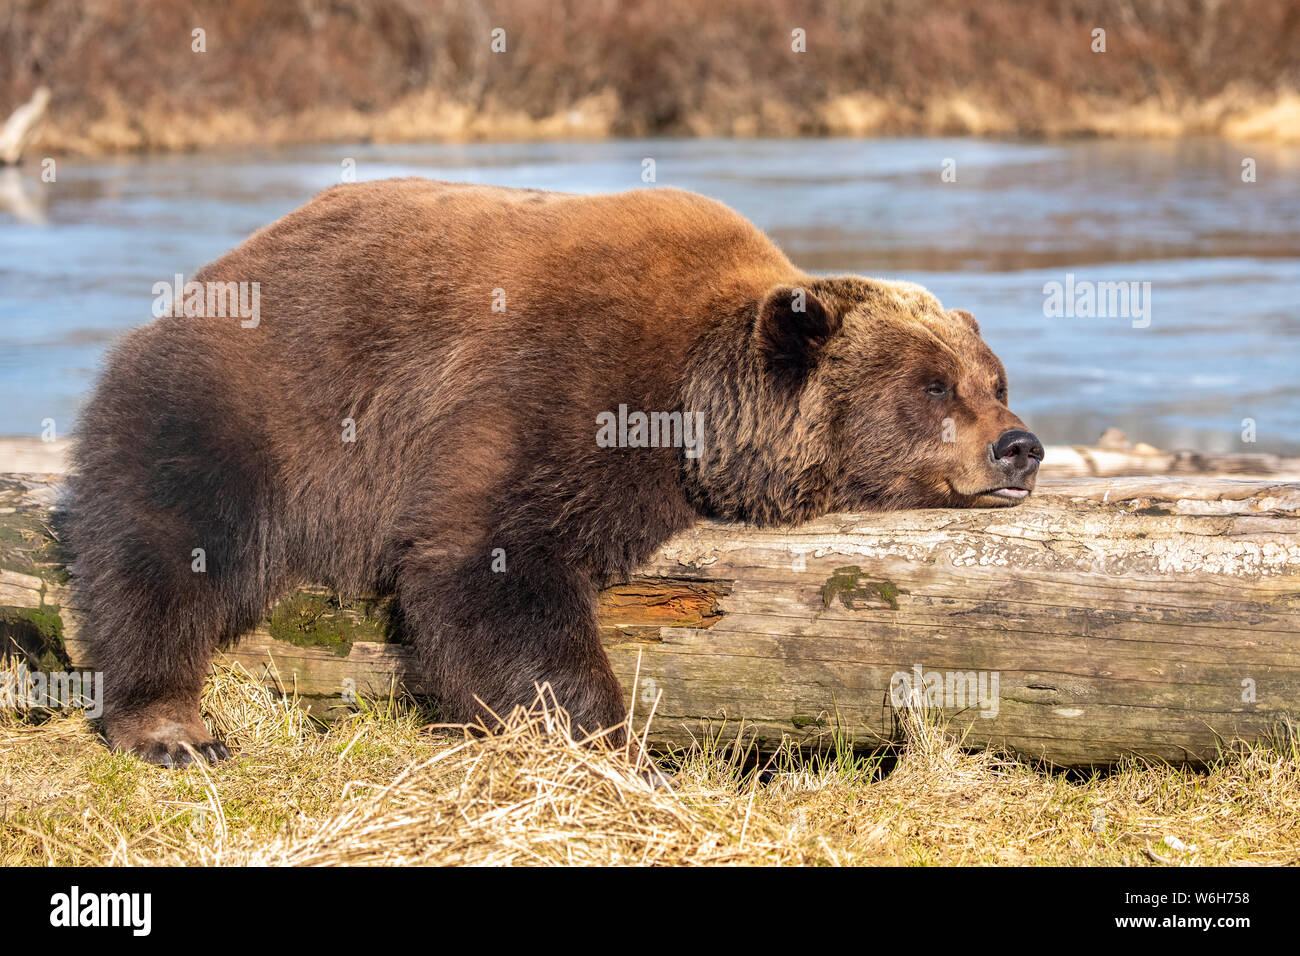 A captive female Brown bear (Ursus arctos) rests and sleeps on a driftwood log at the Alaska Wildlife Conservation Center with a pond in the backgr... Stock Photo